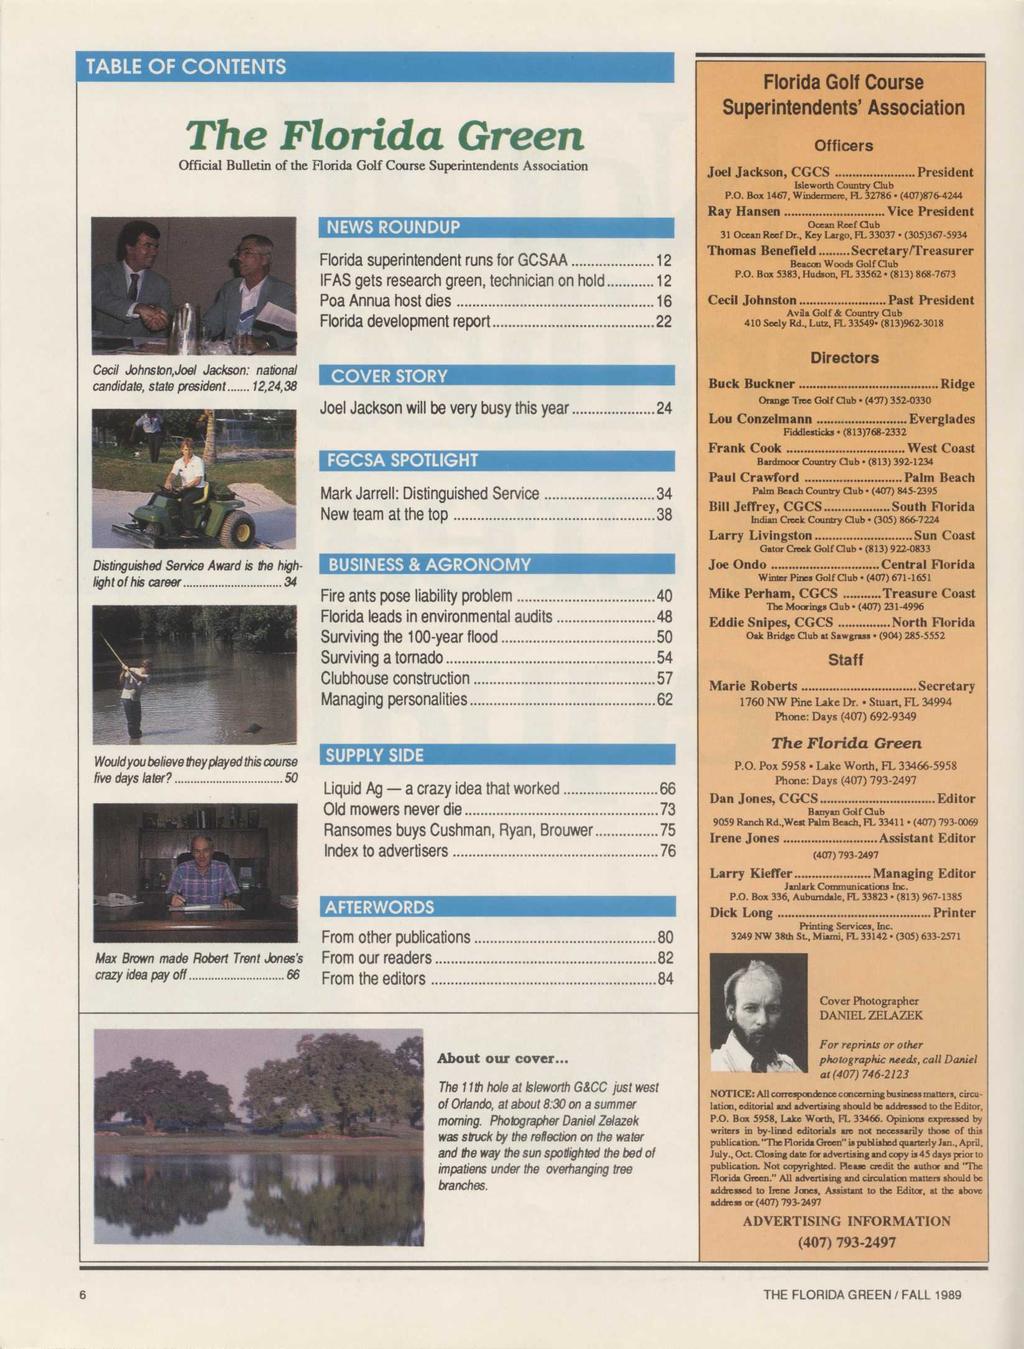 The Florida Green Official Bulletin of the Florida Golf Course Superintendents Association NEWS ROUNDUP Cecil Johnsion,Joel Jackson: national COVER STORY candidate, state president 12,24,36 Florida